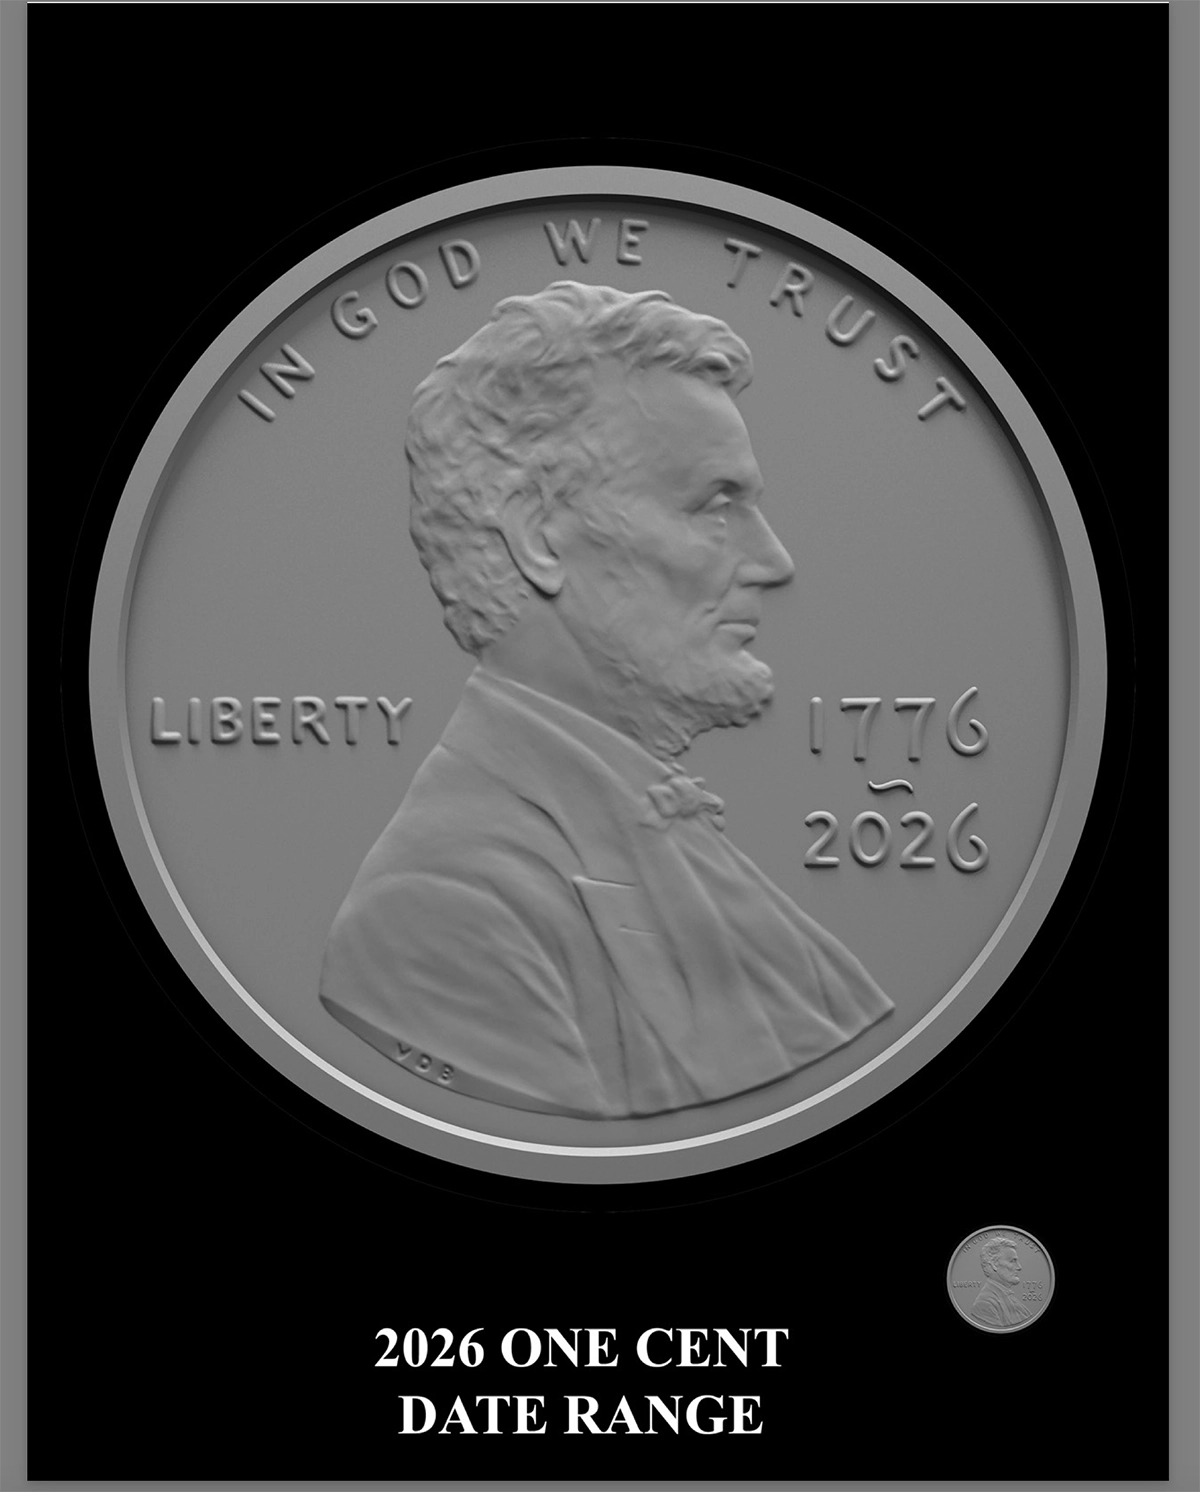 The CFA chose this design for the 2026 Lincoln cent.